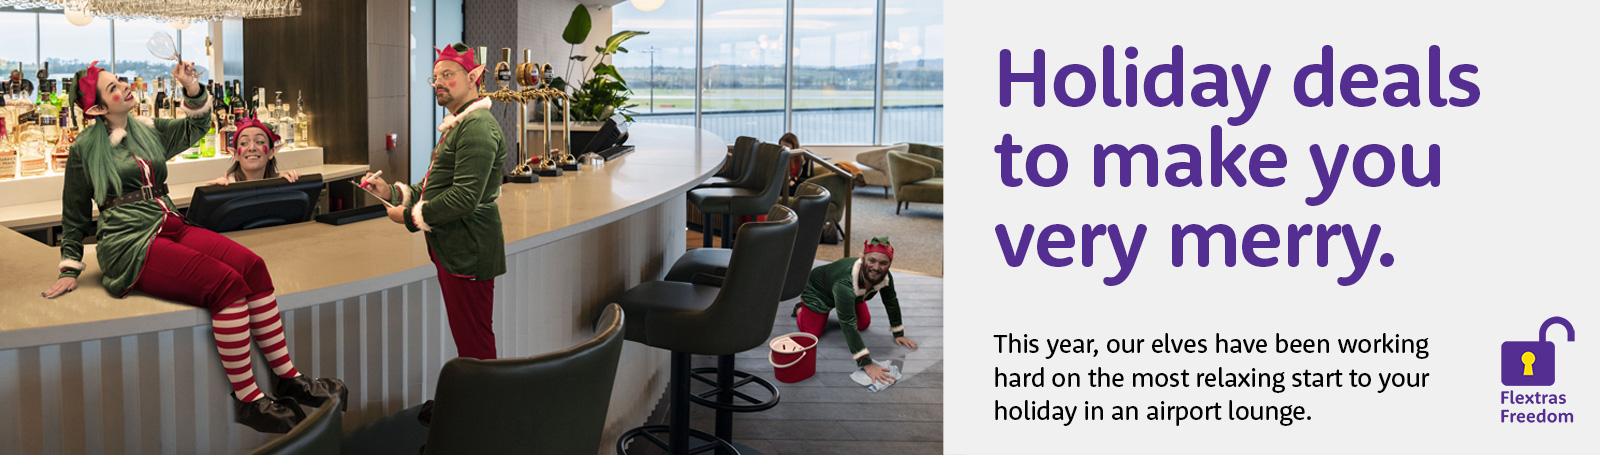 airport lounges christmas holiday deals to make you merry